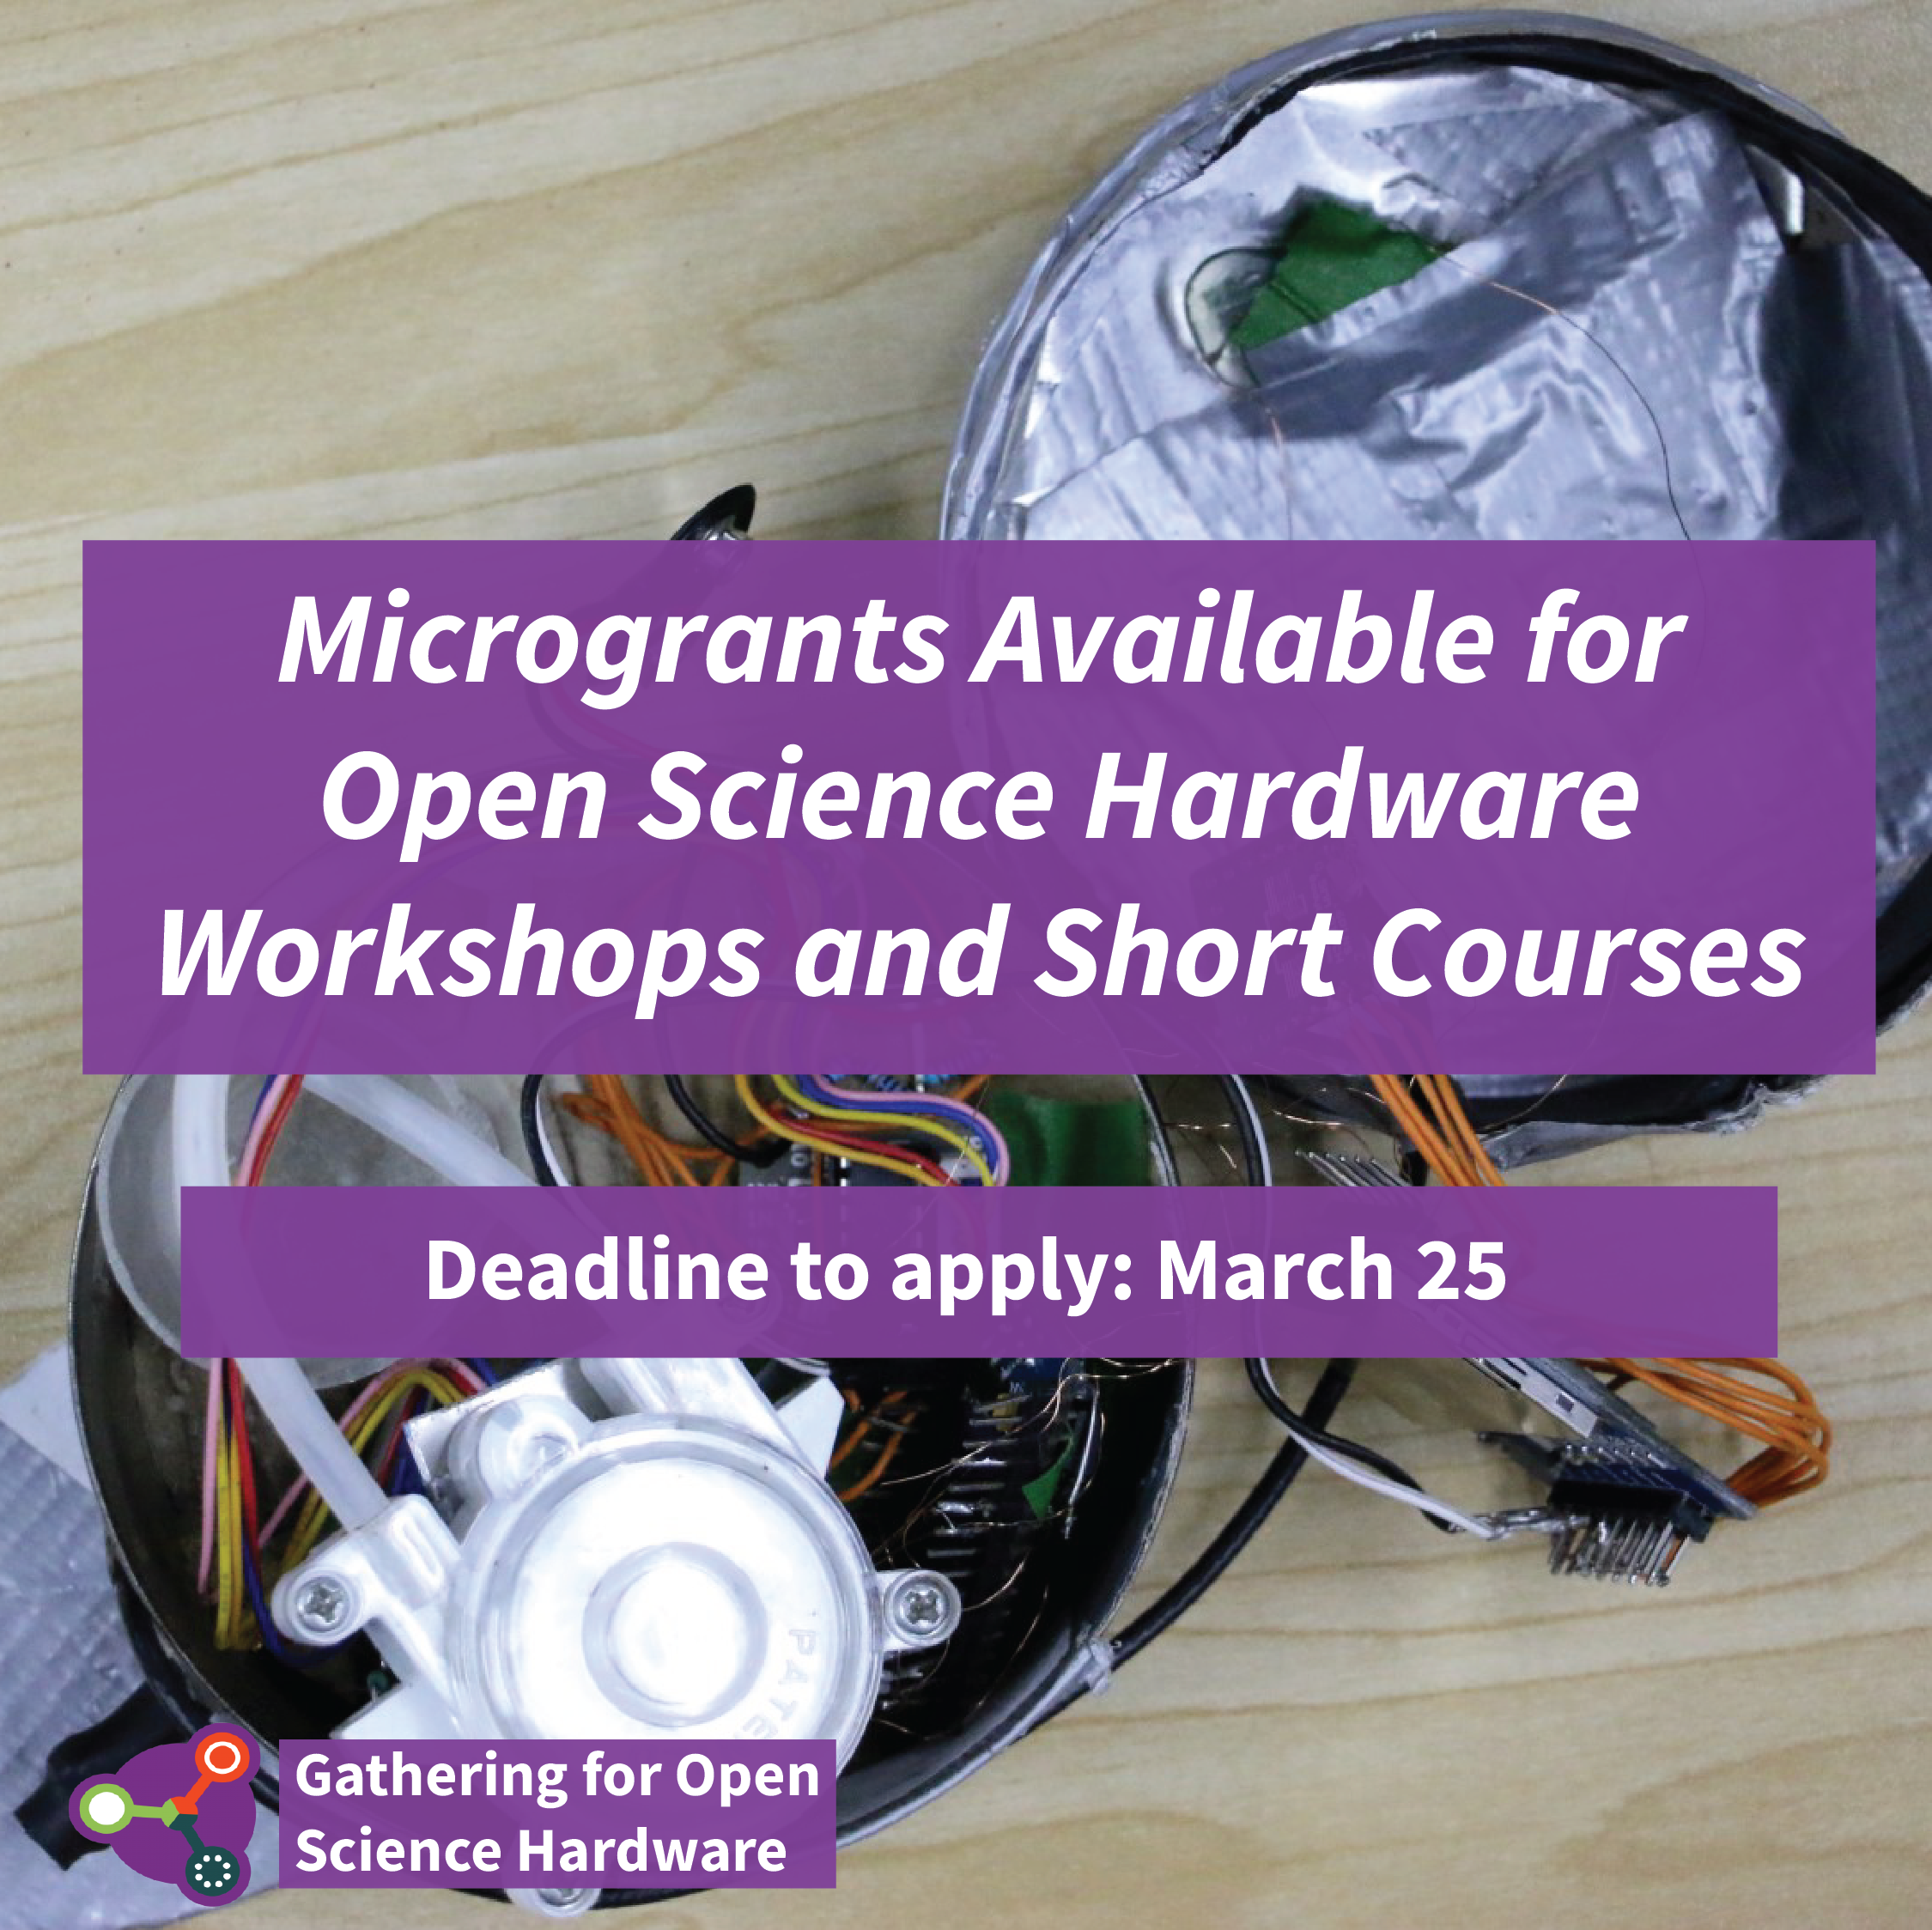 Photo of the GOSH community announcement for the new microgrant program. The photo features a small open science hardware kit in the background, with colorful wires prominently displayed. Over this is a purple text box with text that reads "Microgrants available for open science hardware workshops and short courses, deadline to apply: March 25." In the bottom left corner is the GOSH Community logo, a series of connected circles in light green, orange and dark green with text that reads "Gathering for Open Science Hardware"